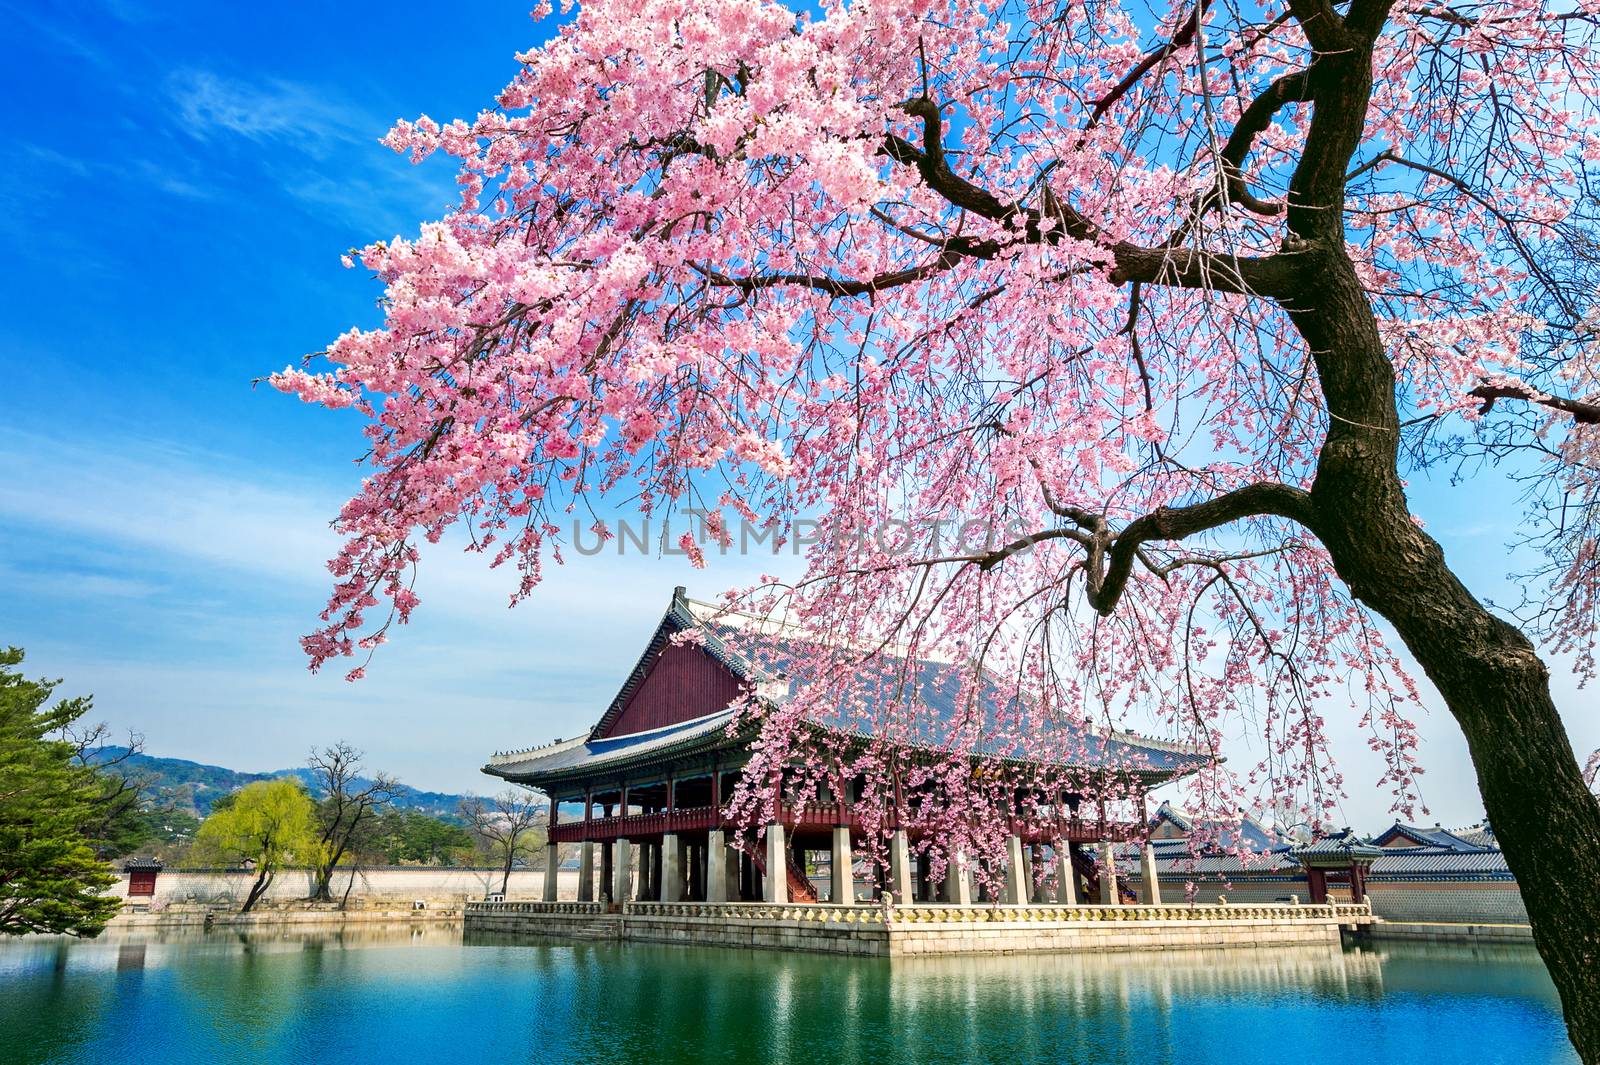 Gyeongbokgung Palace with cherry blossom in spring, Seoul in Korea. by gutarphotoghaphy